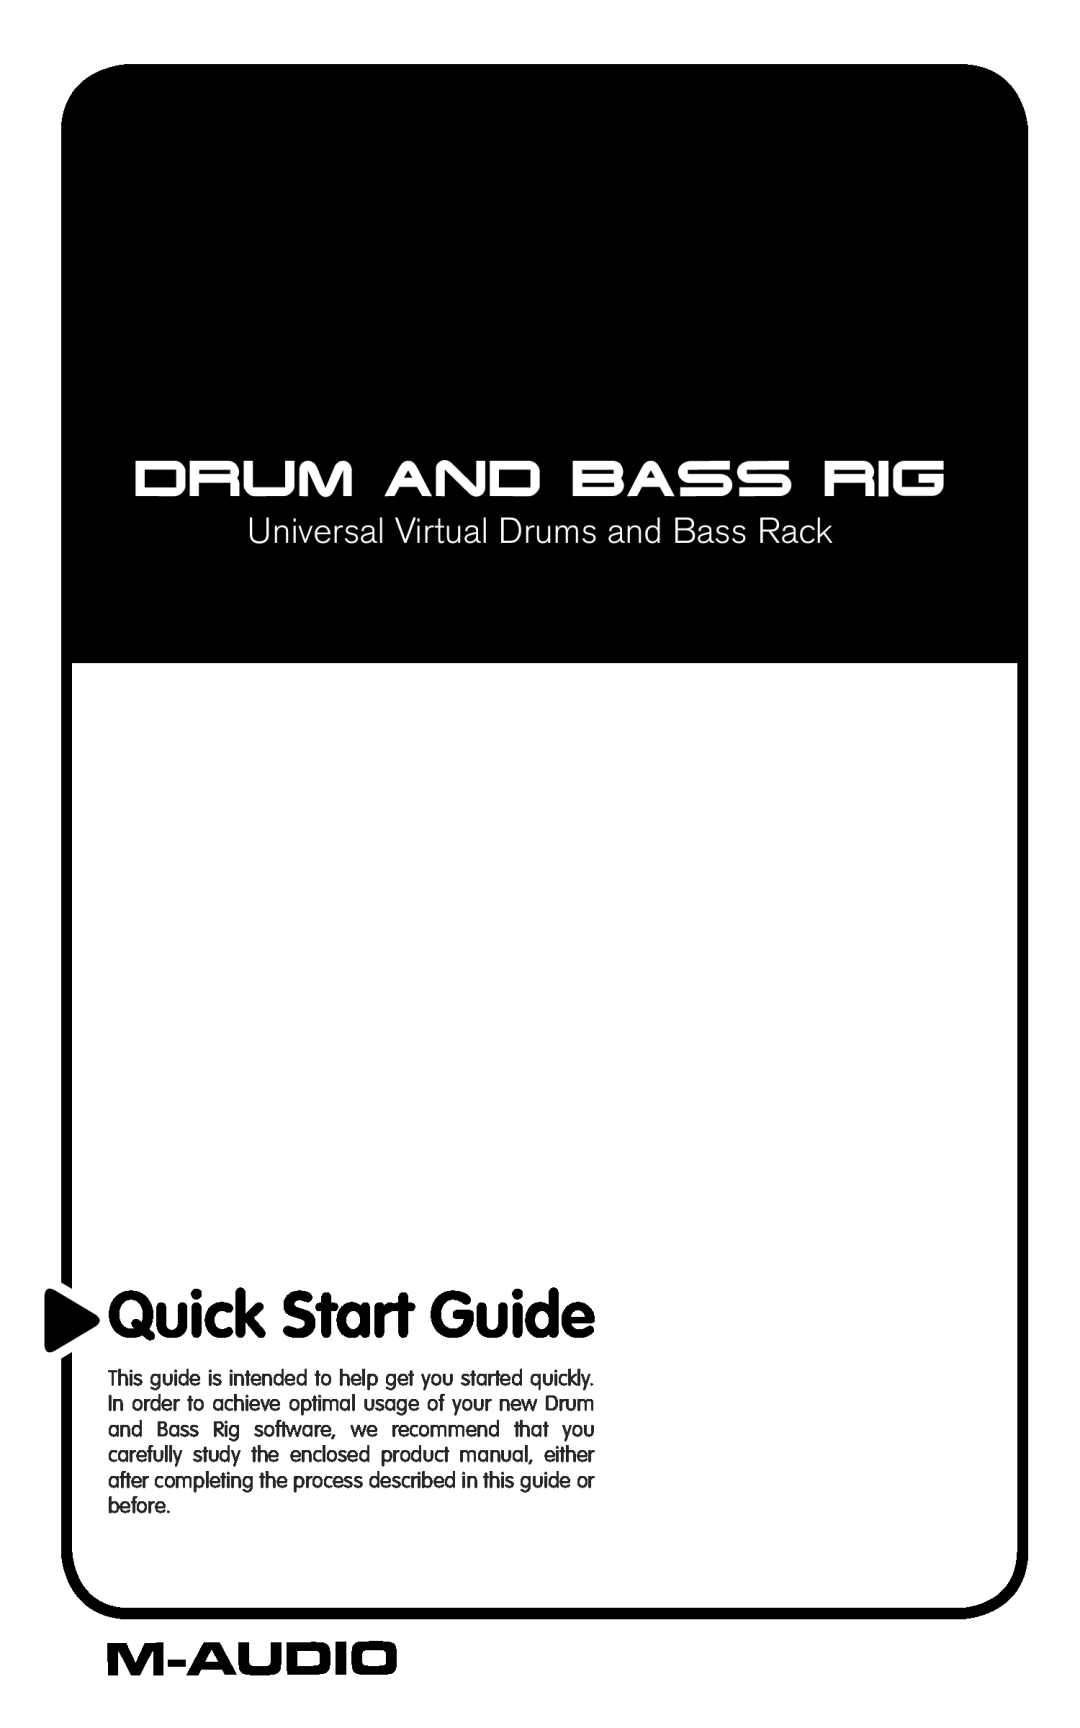 M-Audio VST2 quick start Quick Start Guide, Drum And Bass Rig, Universal Virtual Drums and Bass Rack 